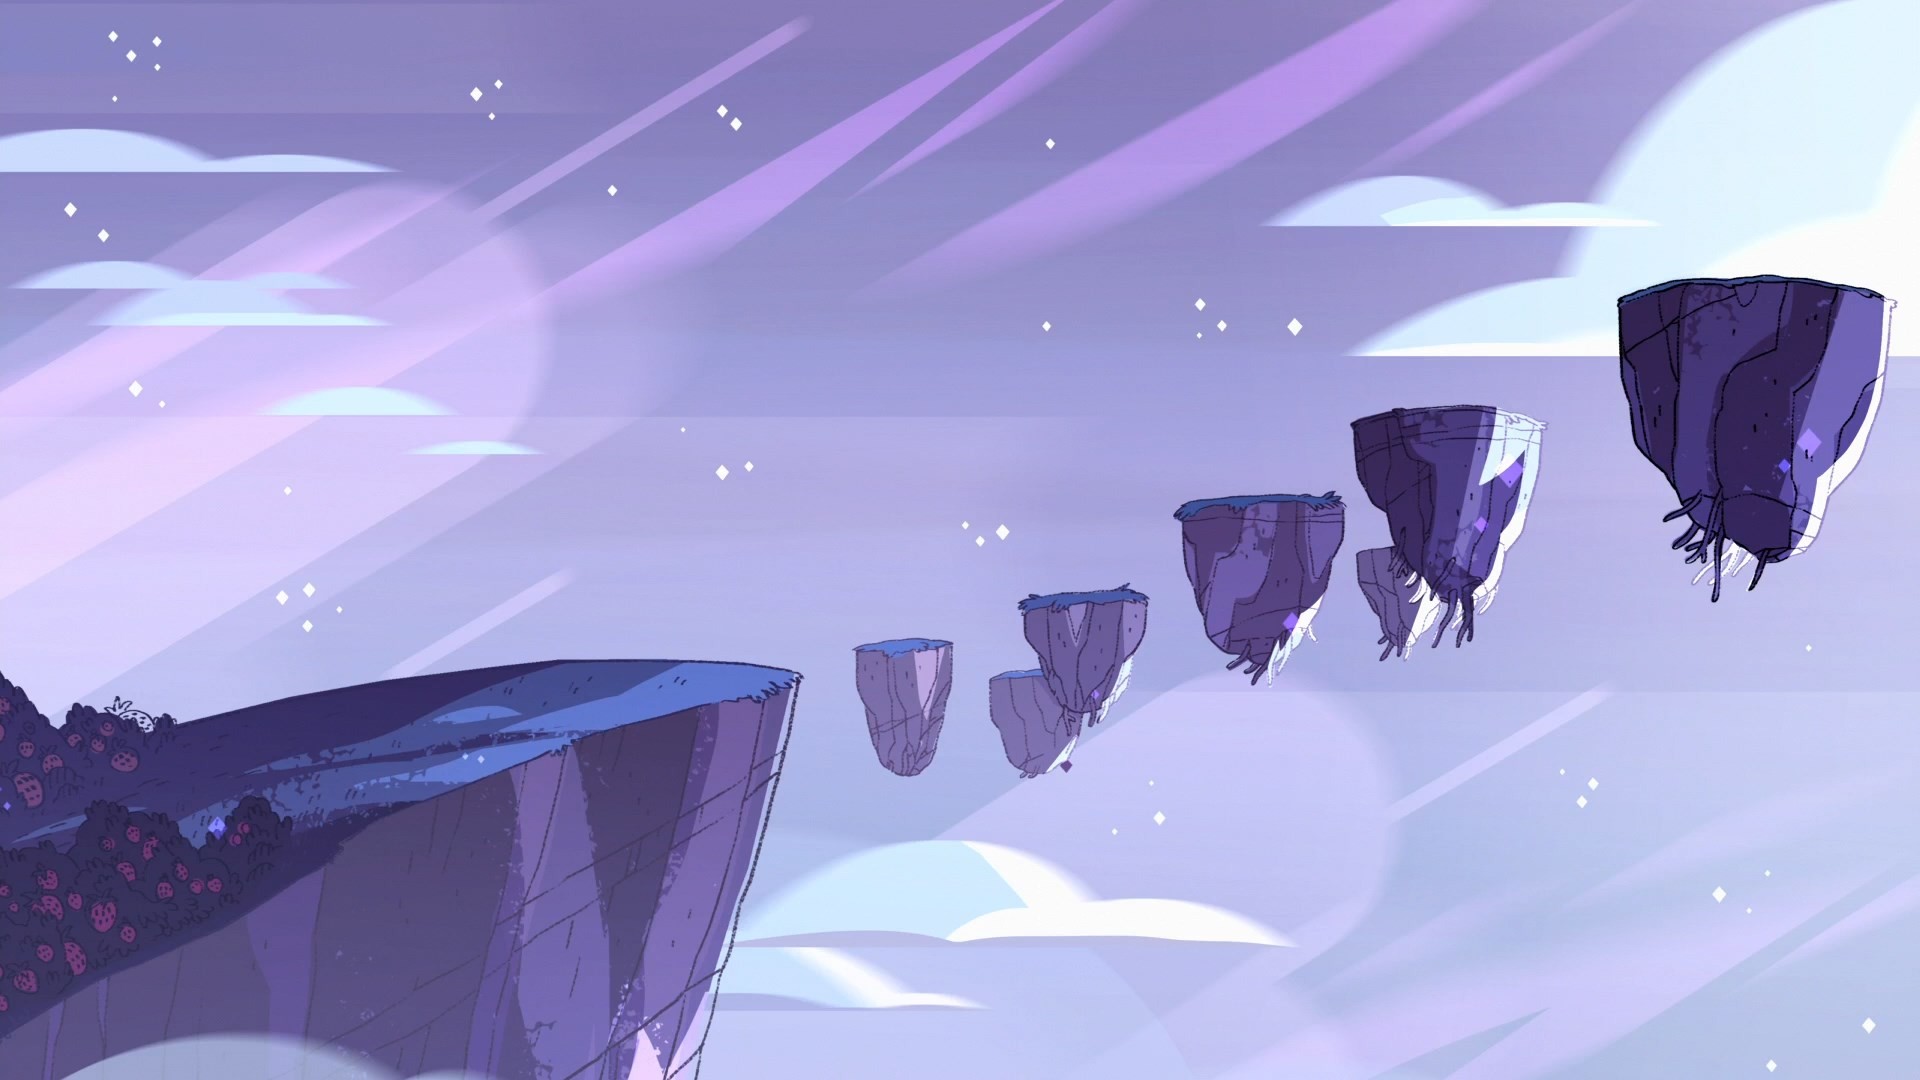 1920x1080 free screensaver wallpapers for steven universe